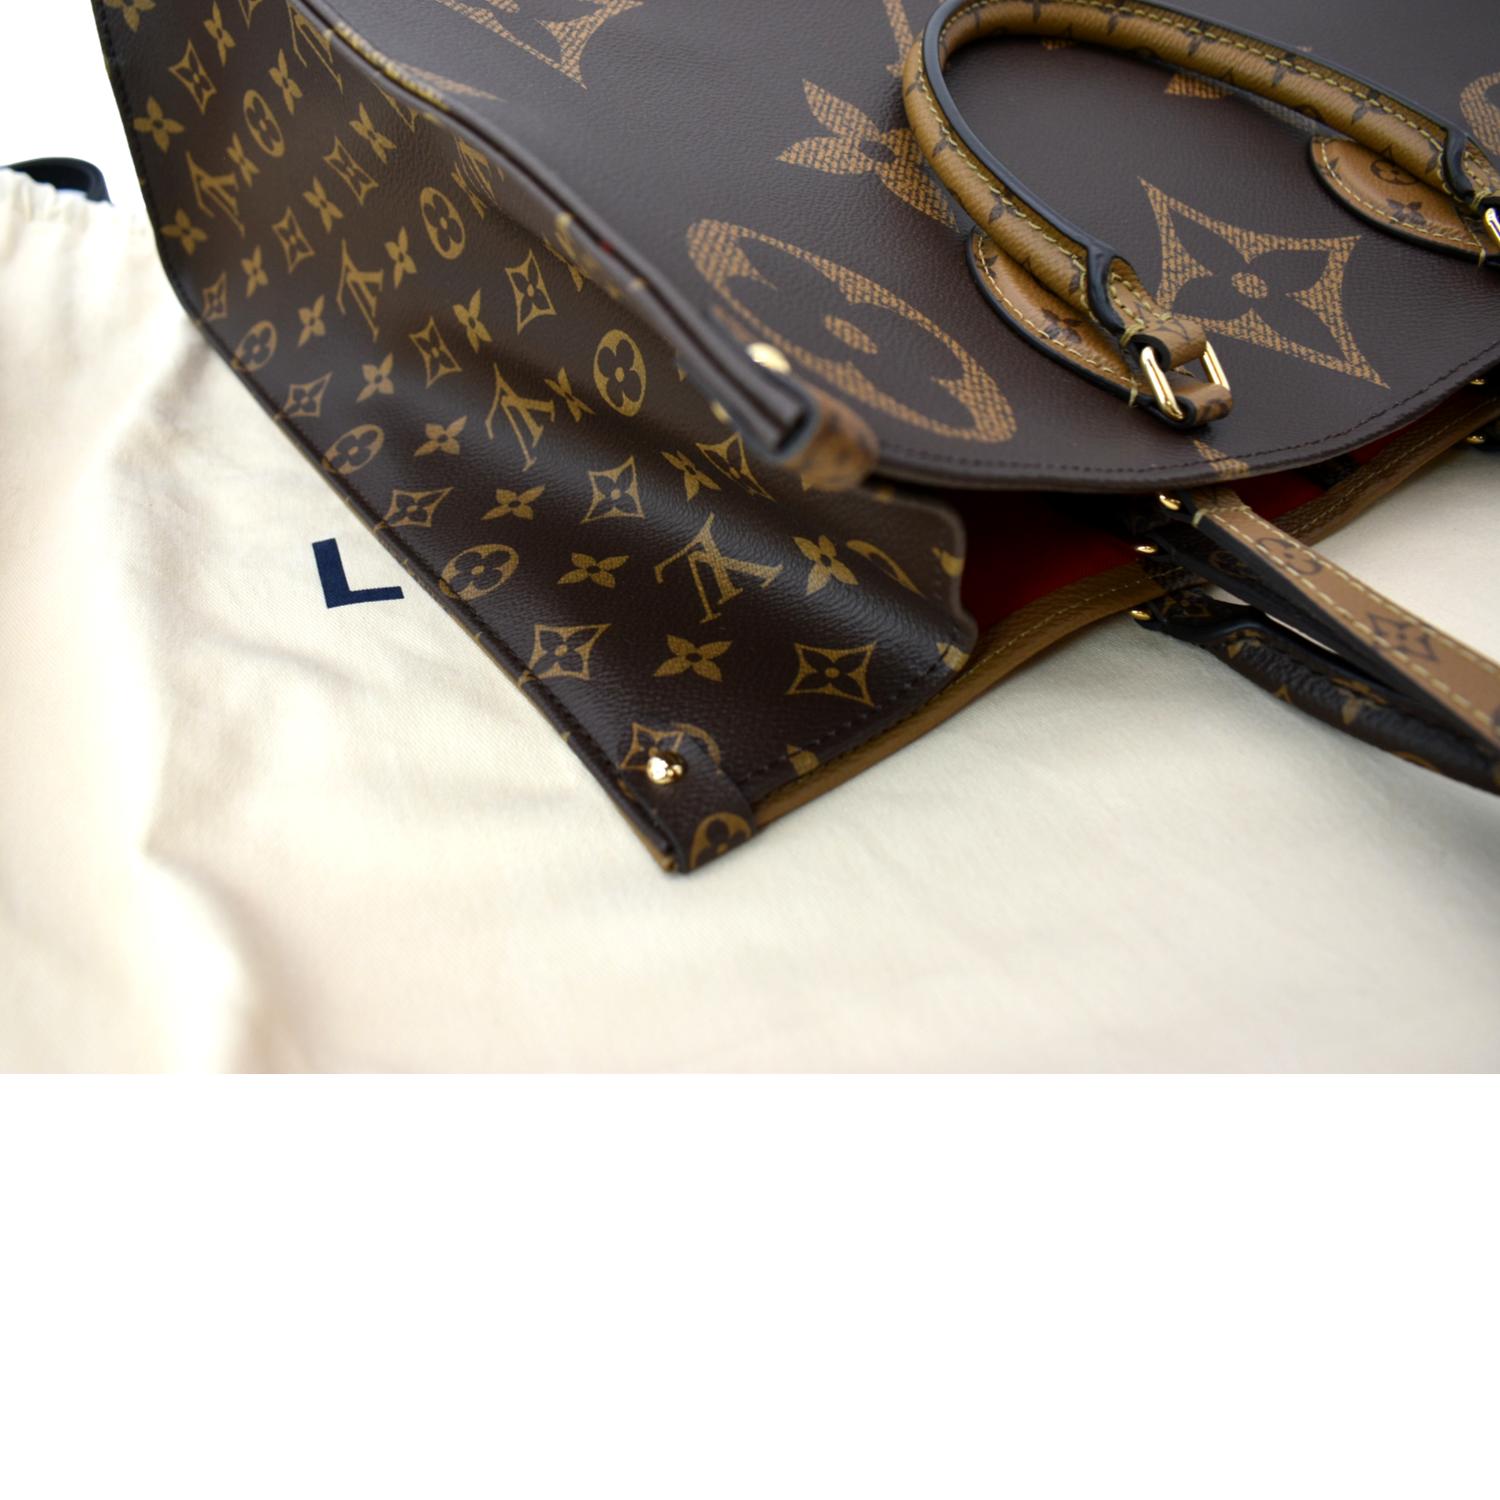 M45814 Louis Vuitton Monogram Coated OnTheGo GM Tote Bag